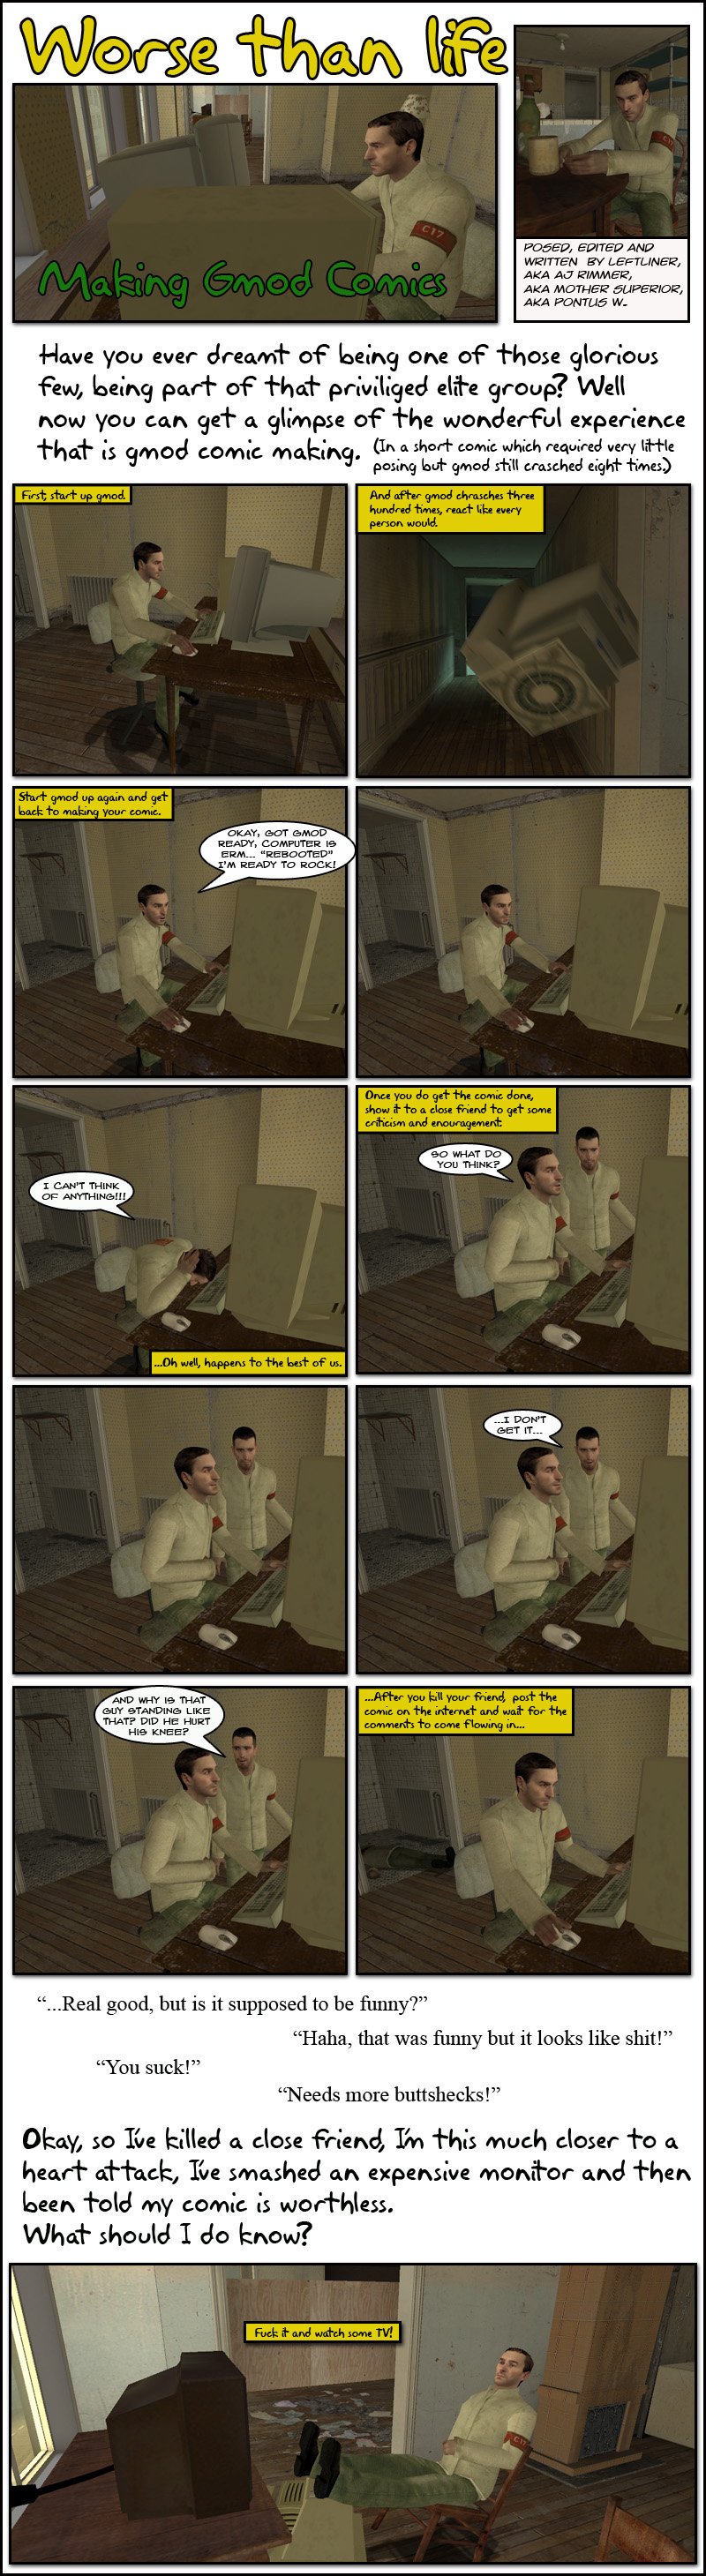 The narration asks if you have ever dreamt of being one of those glorious few, being part of that privileged group, then explains that now you can get a glimpse of the wonderful experience that is Garry's Mod comic making, in a short comic which required very little posing but GMod still crashed eight times. First, the narration says, start up GMod. And after GMod crashes three hundred times, react like any person would, as it shows a computer monitor flying across a hallway. The narration then says to start GMod up again and get back to making your comic. AJ Rimmer exemplifies, with GMod having loaded and him saying he is ready to rock. He sits in front of the computer motionless for a moment, then declares he can't think of anything. The narration says it happens to the best of them, then adds that once you do get the comic done, show it to a close friend to get some criticism and encouragement. AJ Rimmer shows his screen to Peter, asking what he thinks. Peter stares at it for a moment, then reluctantly tells Rimmer he doesn't get it, then asks why the character is standing like that and whether he hurt his knee. The narration continues by explaining that after you kill your friend, you post your comic on the Internet and wait for the comments to come flowing in. A few examples are shown, saying that it is real good but asking whether it's supposed to be funny, or that it was funny but looks like shit, another that says Rimmer sucks and a last one that says it needs more butt sex. The narration finishes by saying fuck it and watch some TV. The end.